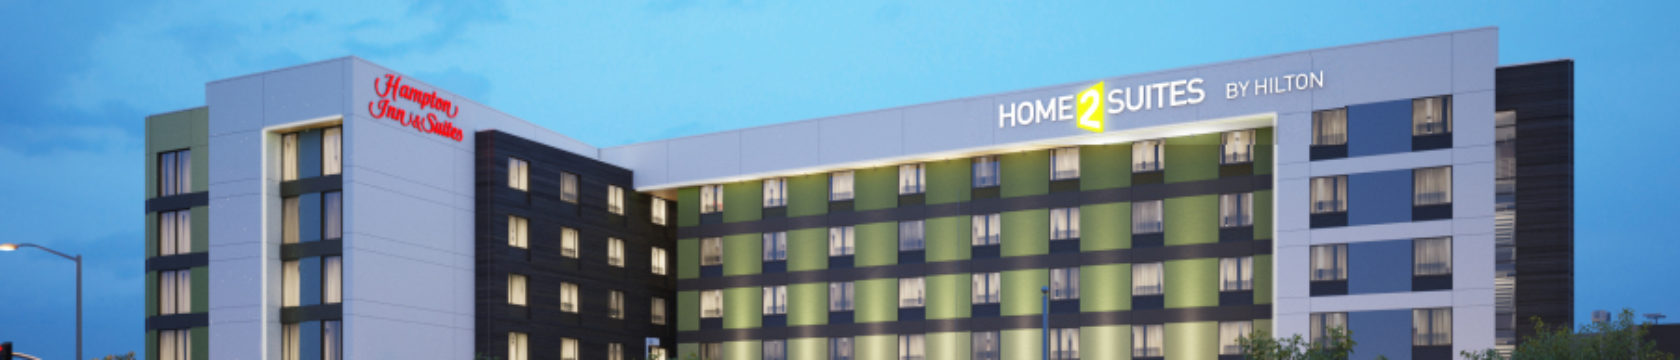 Hampton Inn and Home2 Suites by Hilton